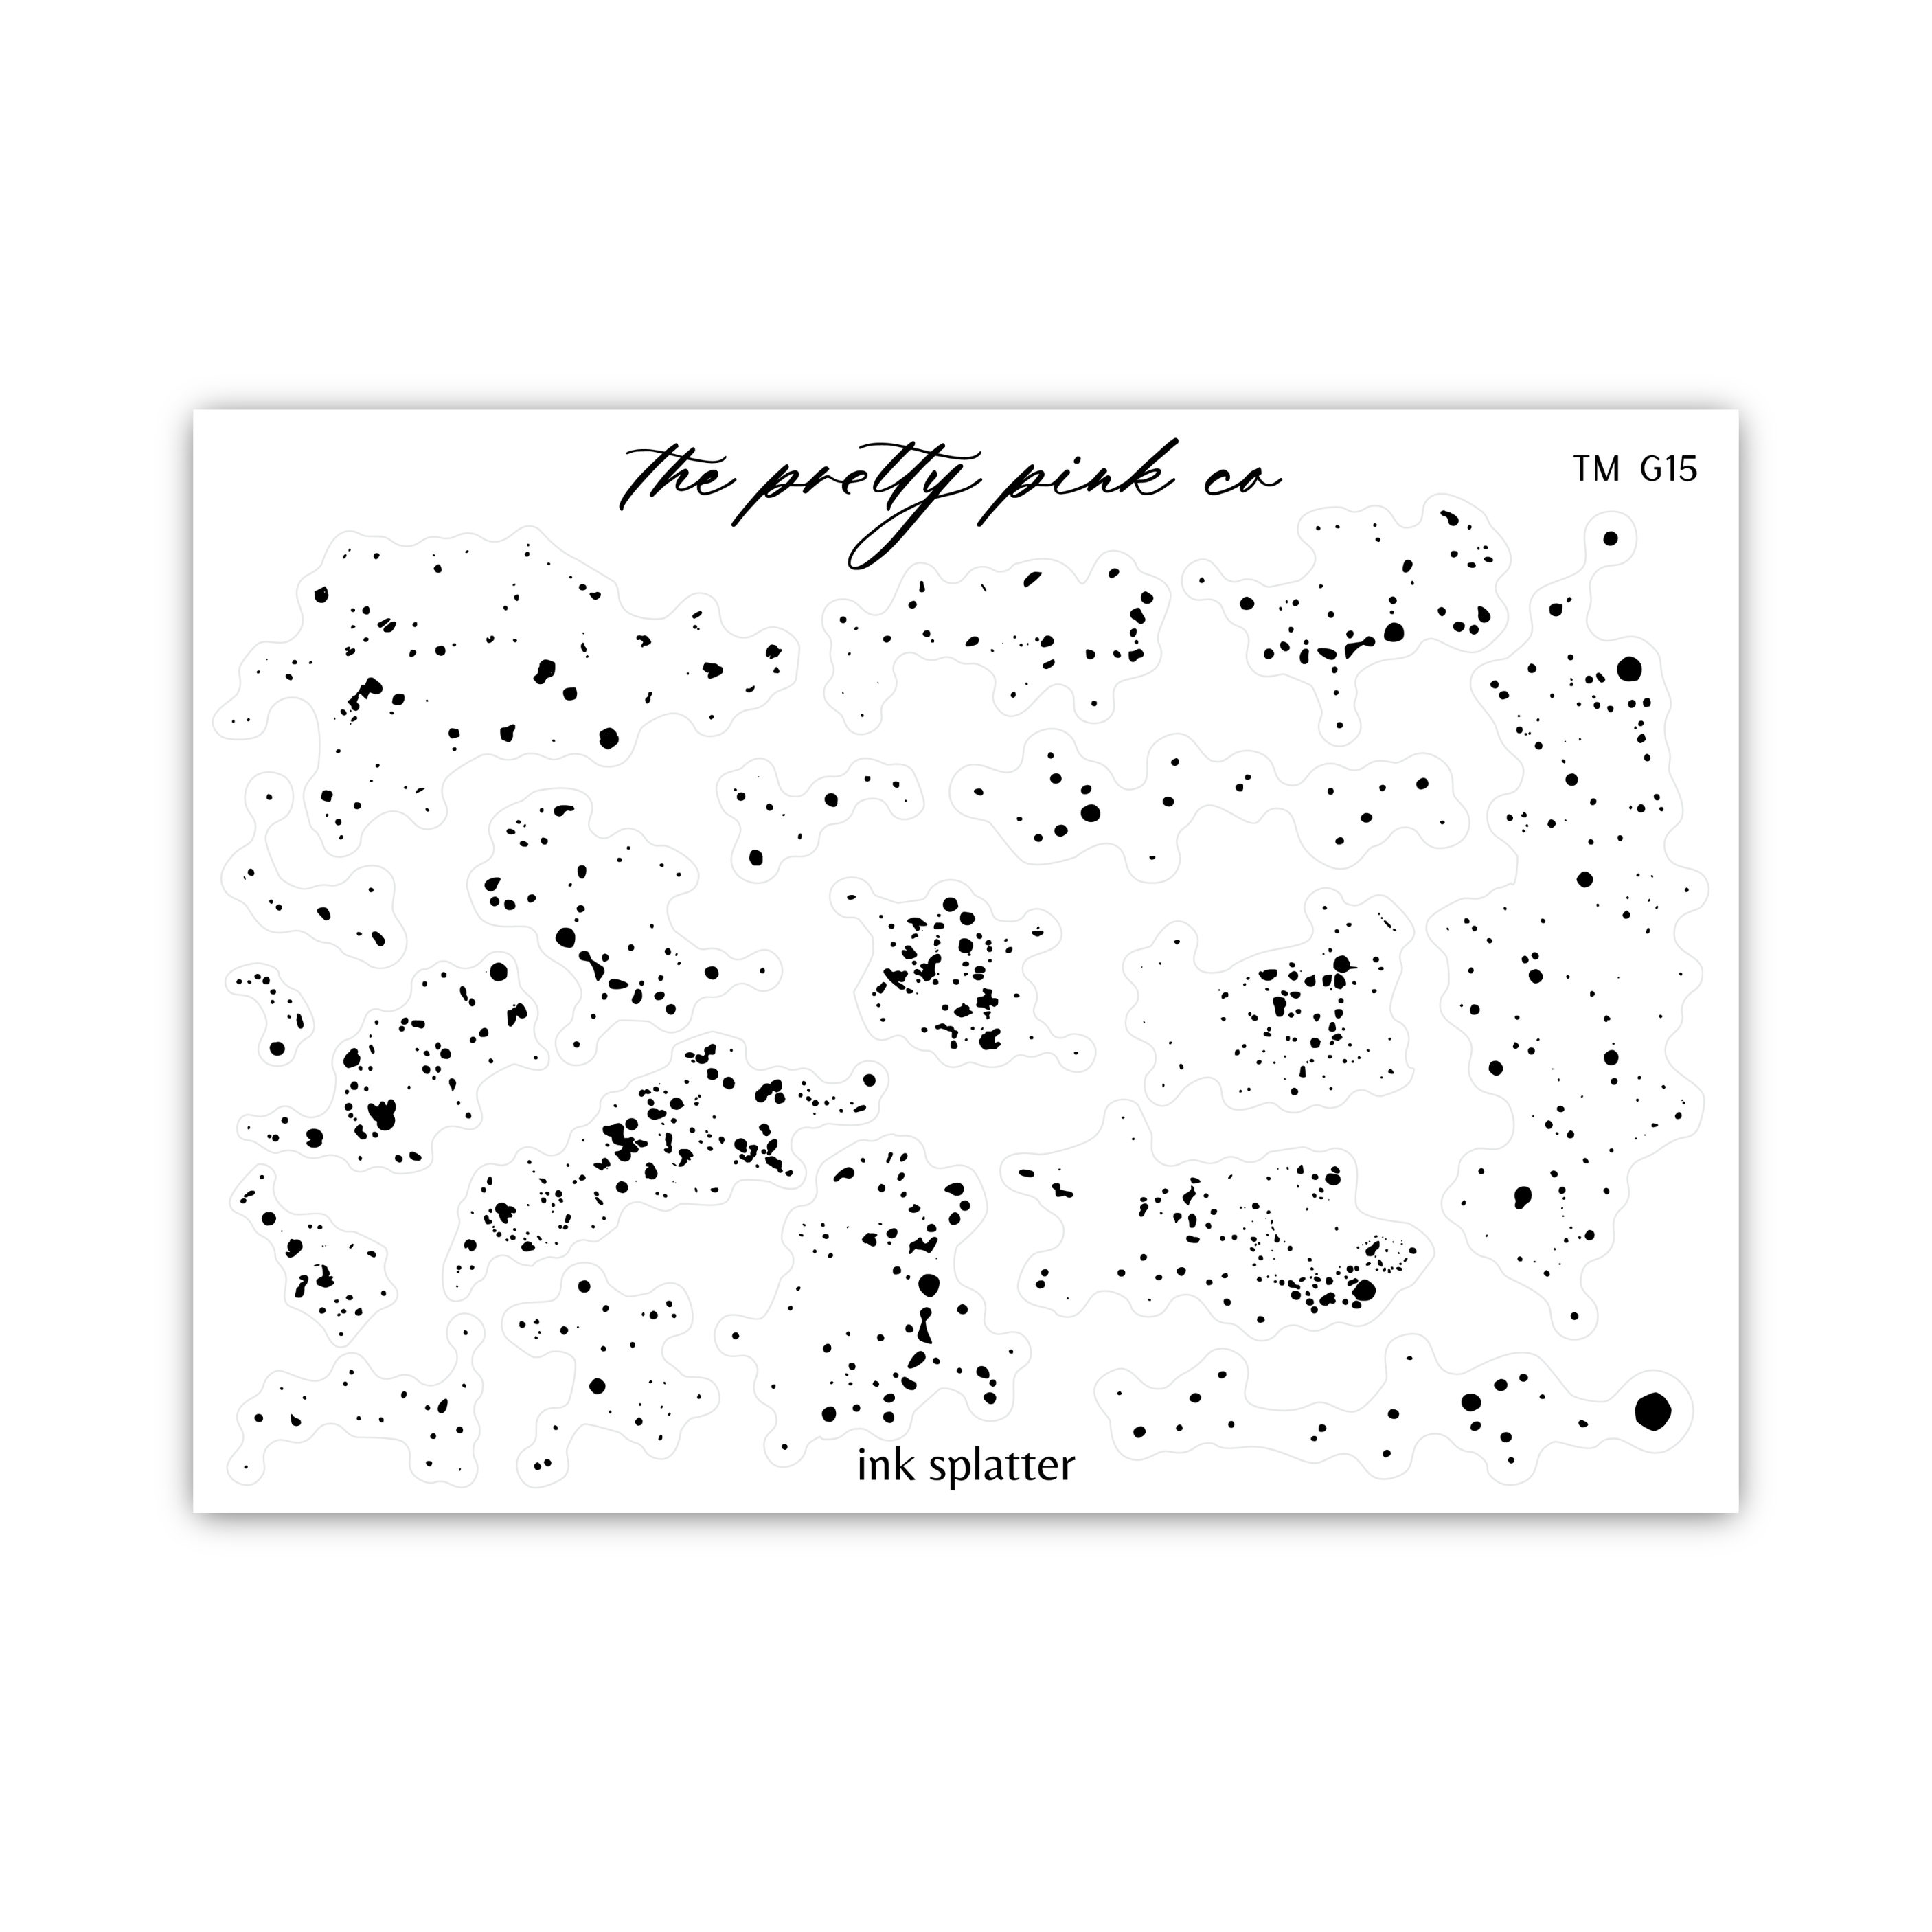 a black and white photo of a star map